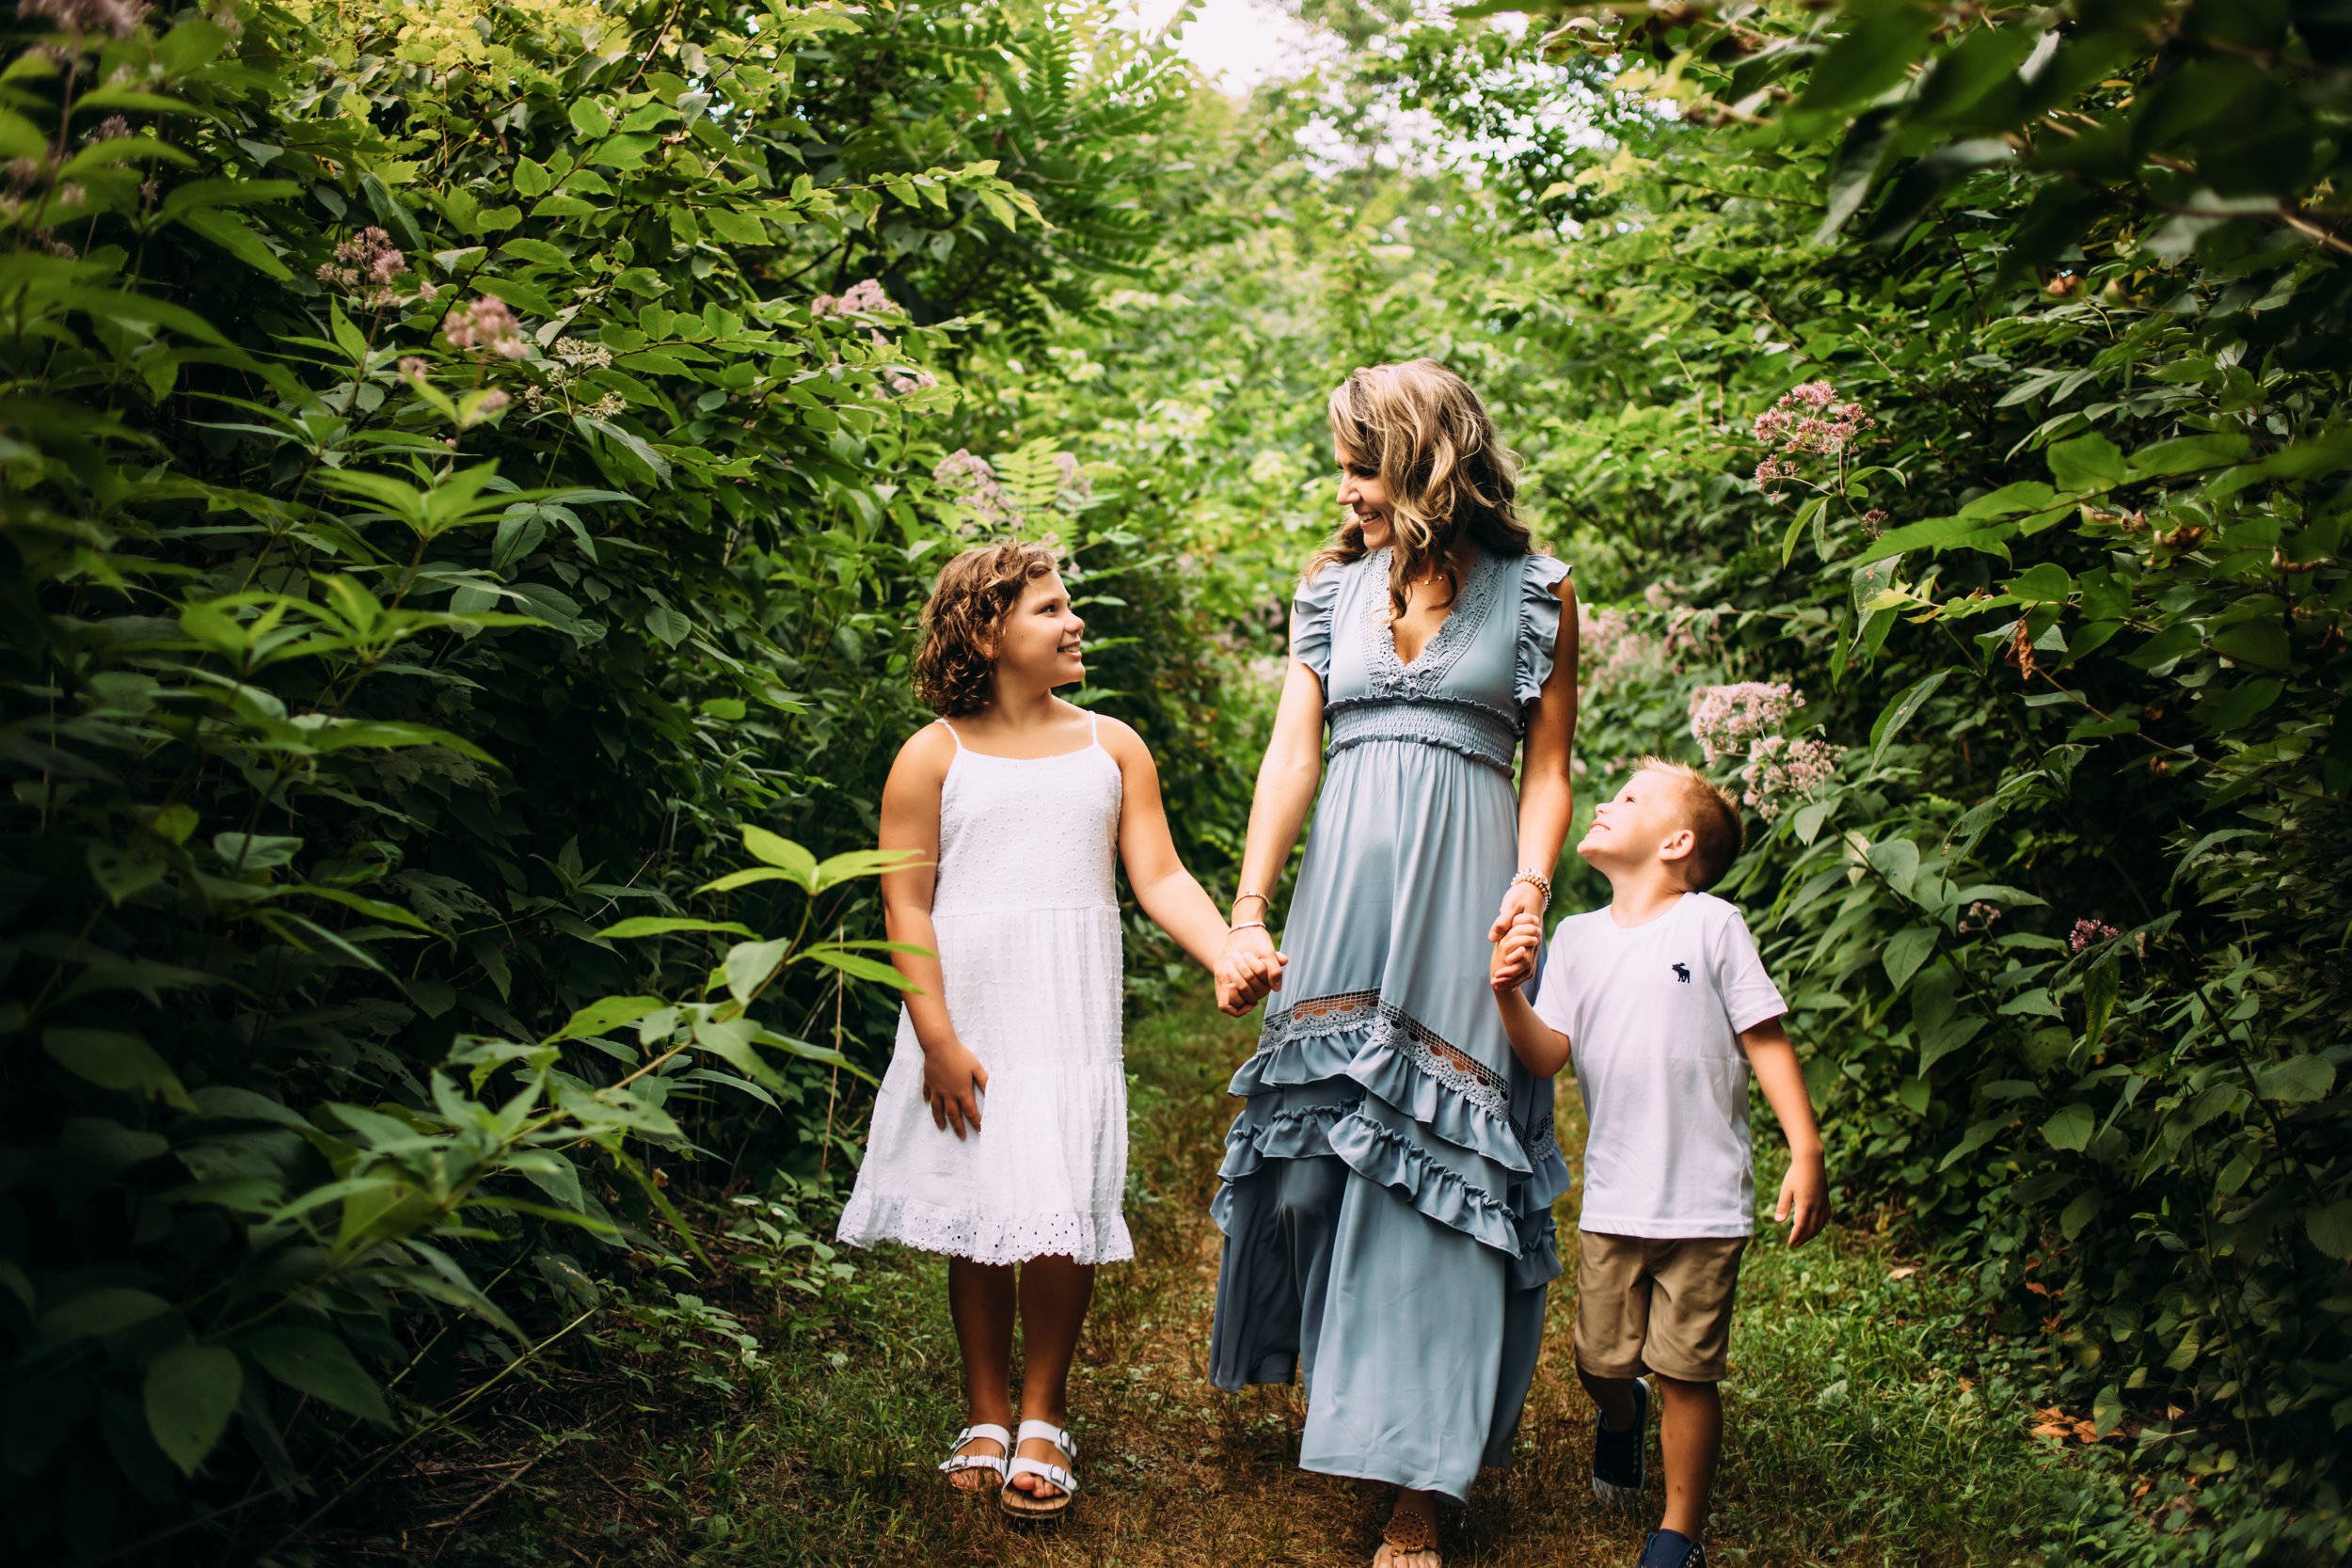  A mother holds her children's hands while walking through a green forest alcove by Teala Ward Photography. Illinois family moments #motherhood #mommapics #TealaWardPhotography #TealaWardFamilies #IllinoisPhotographers #IllinoisFamilyPhotography 